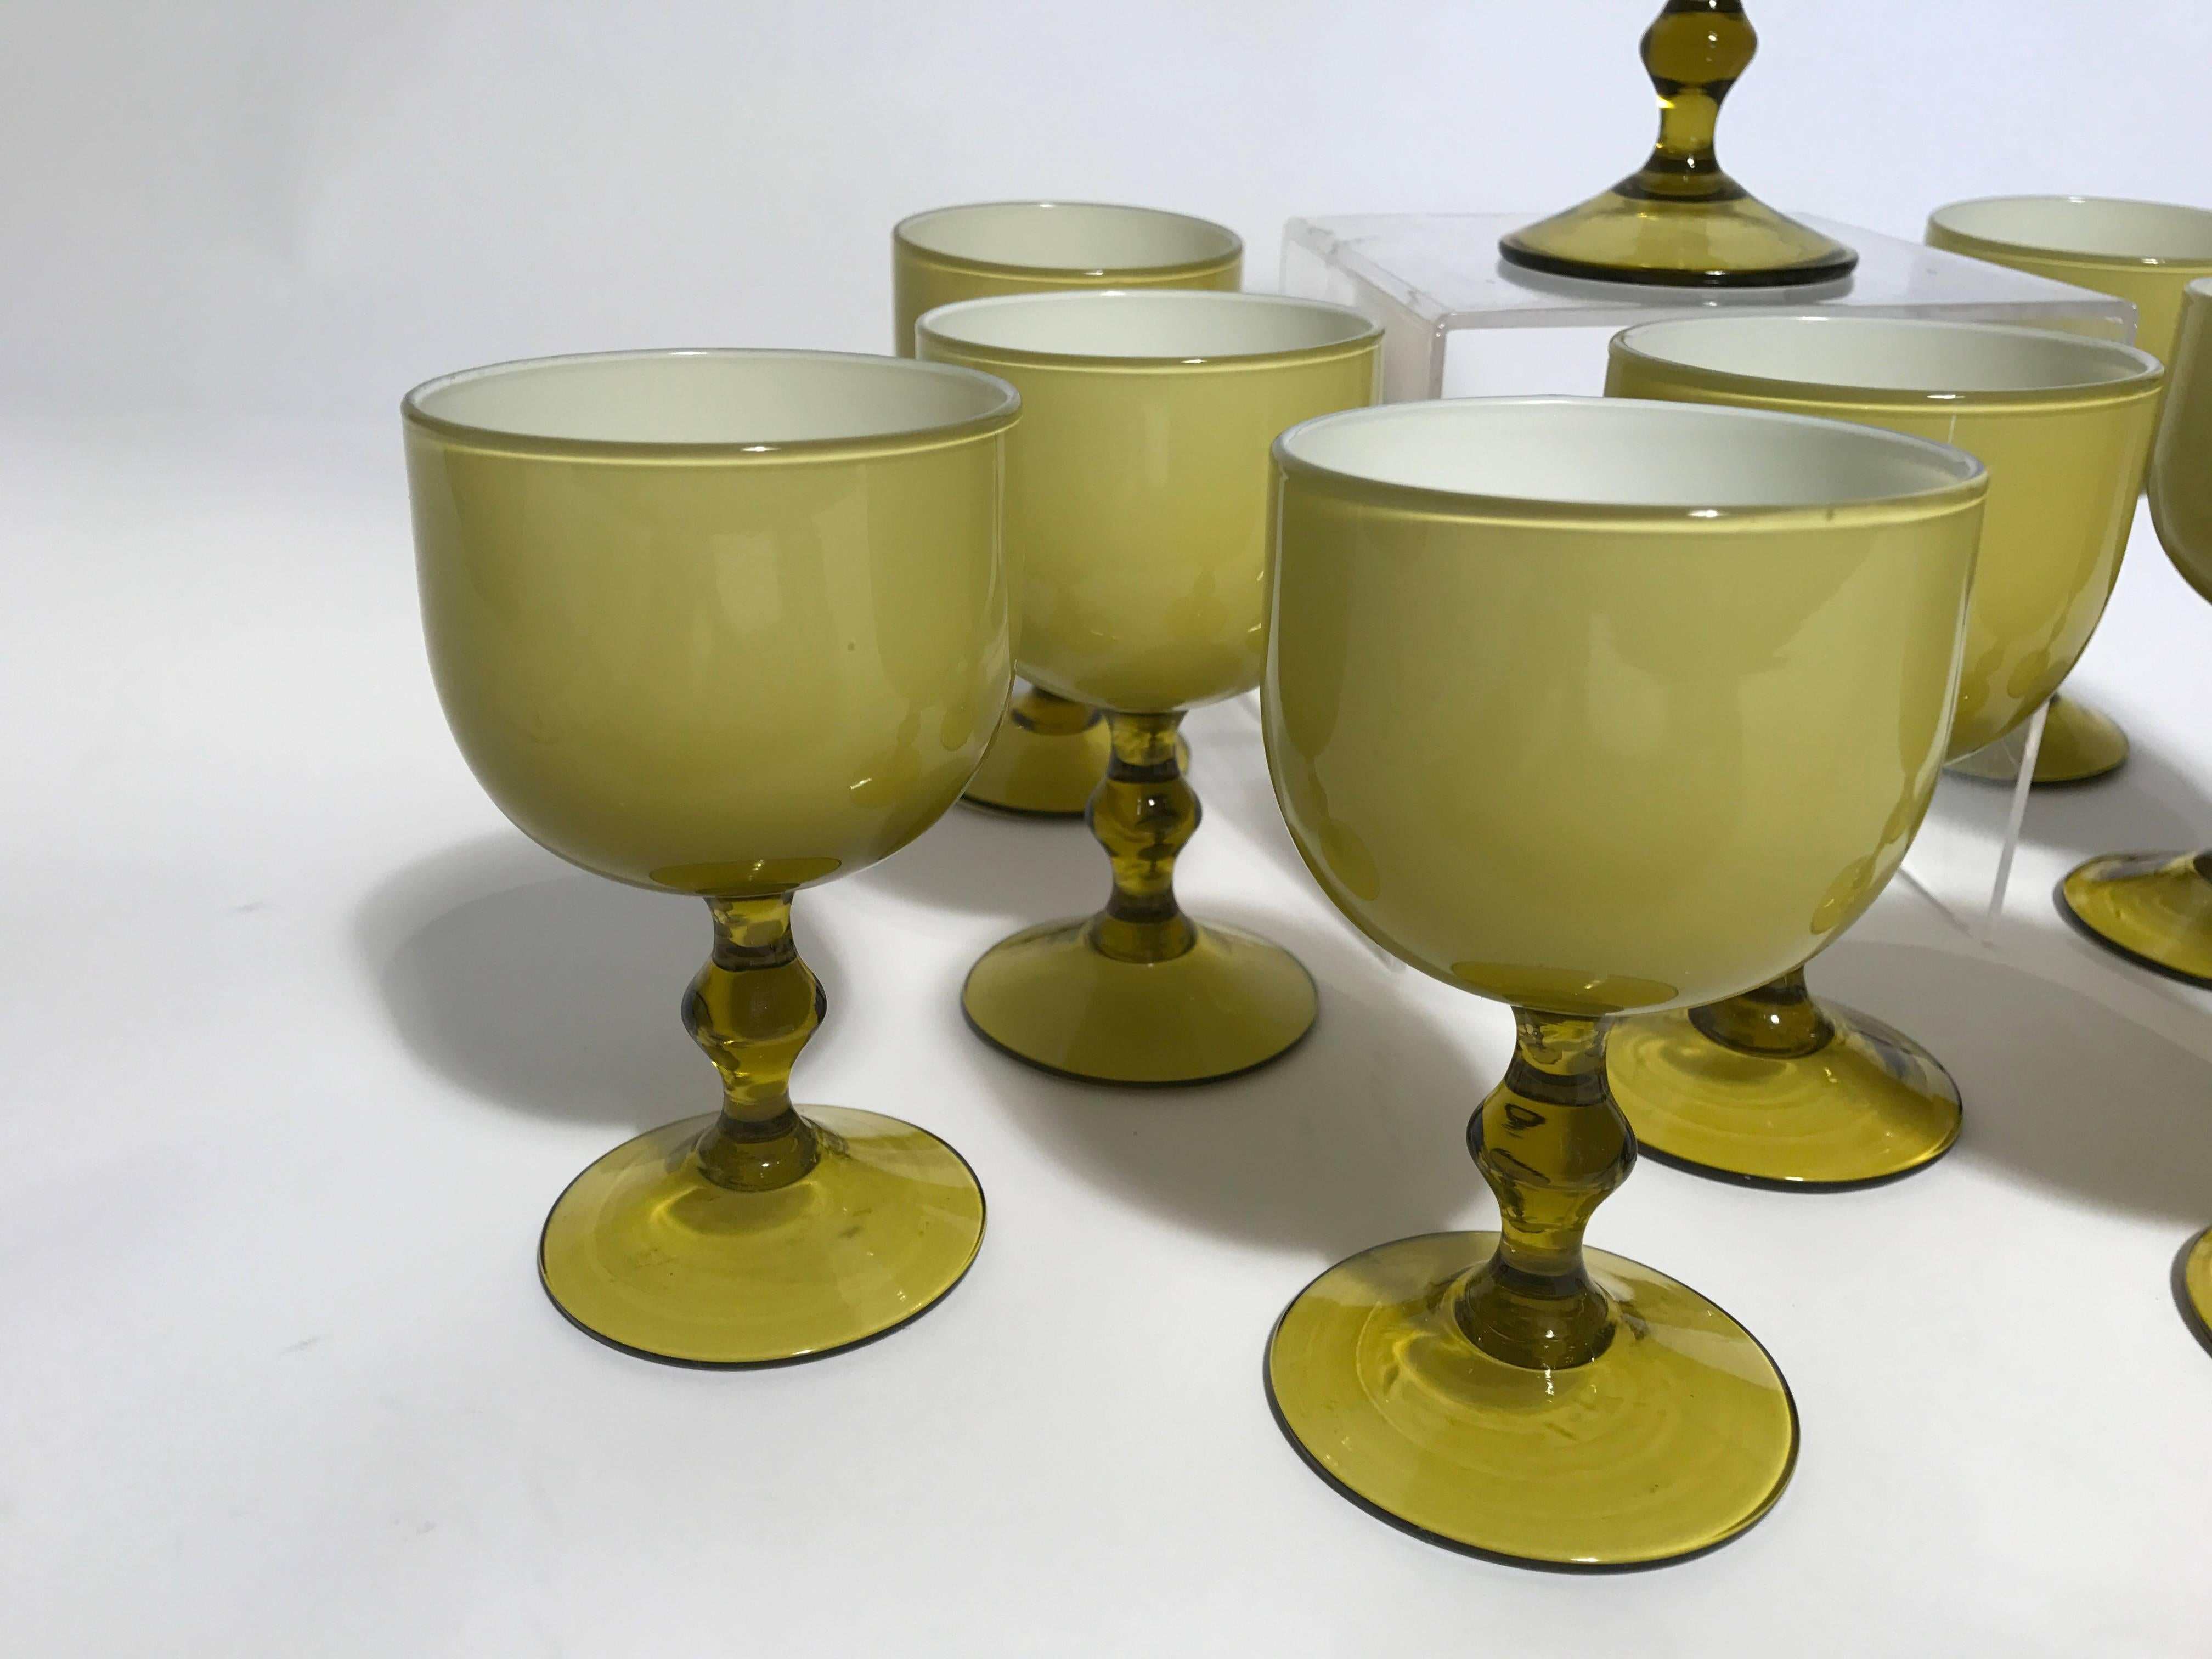 A crisp and nicely proportioned set of ten wine glasses. Featuring Moretti's clean and crisp detailing, knob stem and will proportioned bowl and feet. What a great color! This amber/olive will go with everything.